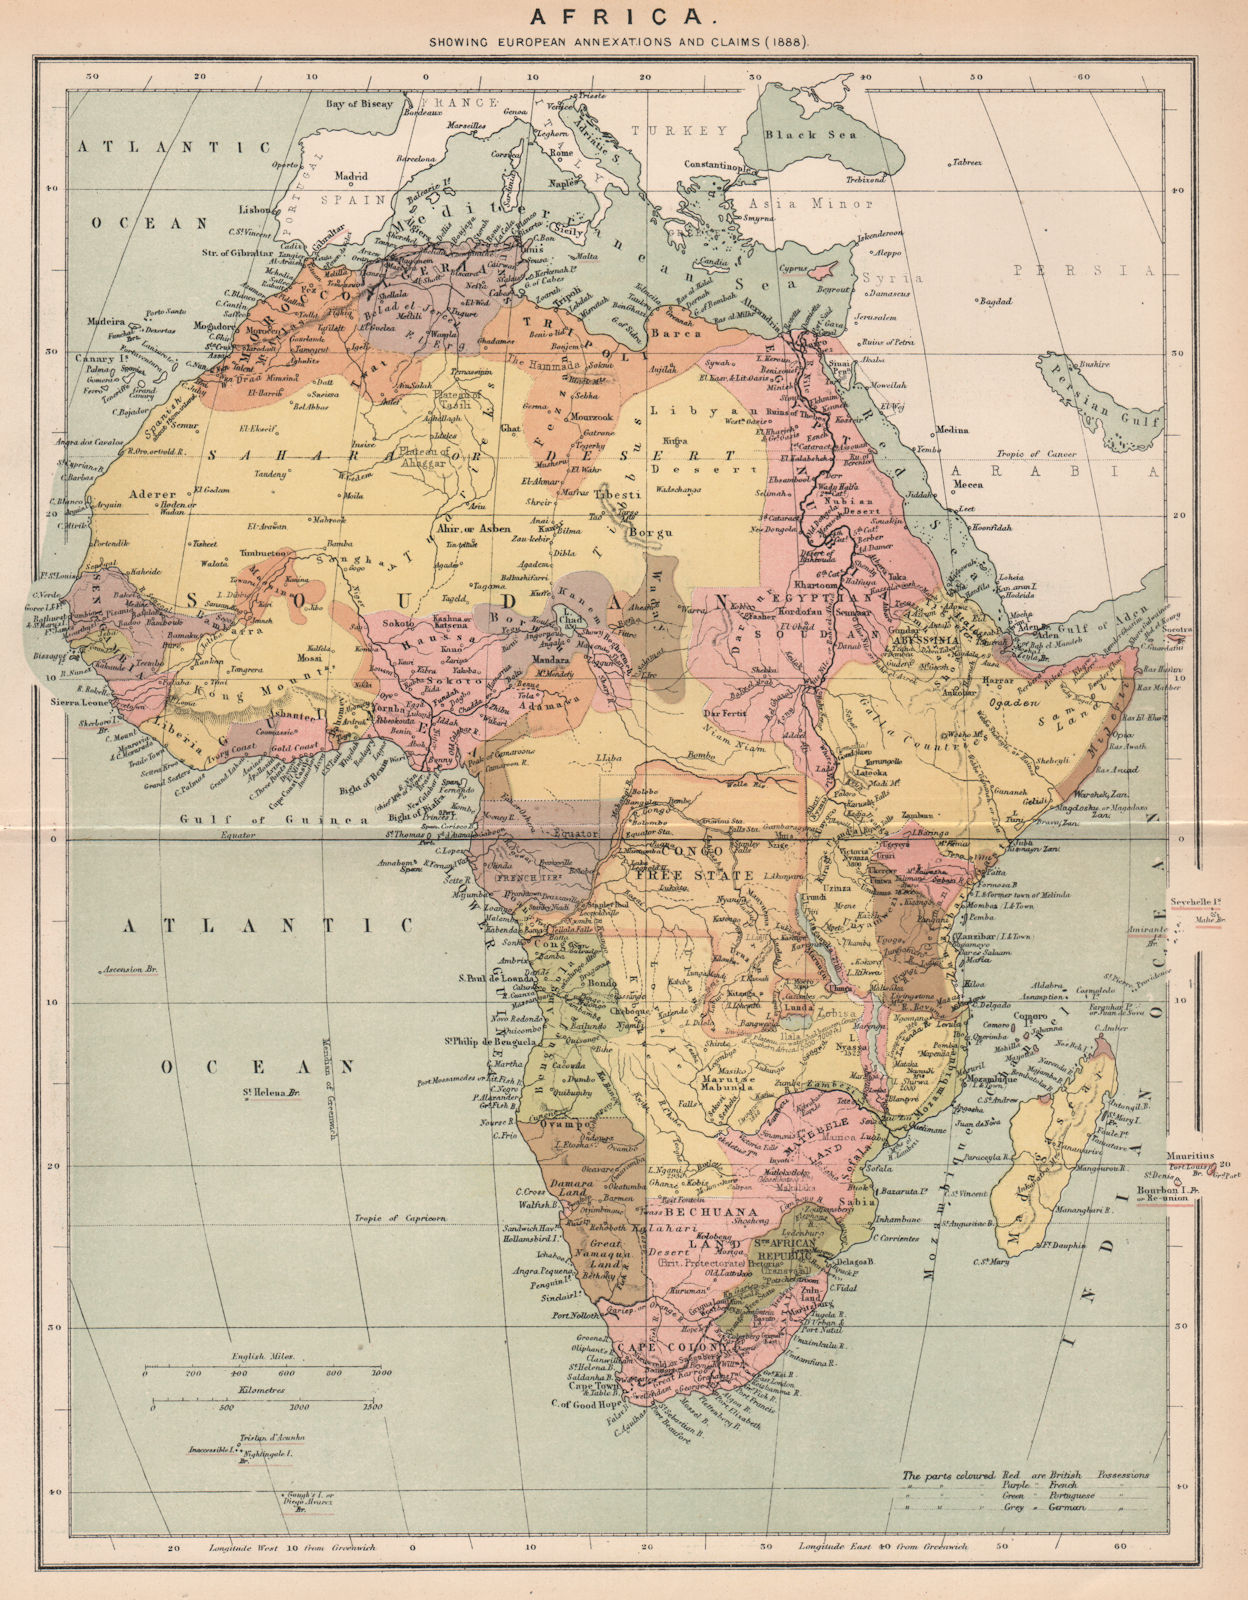 Africa. South Africa 1885 old antique vintage map plan chart